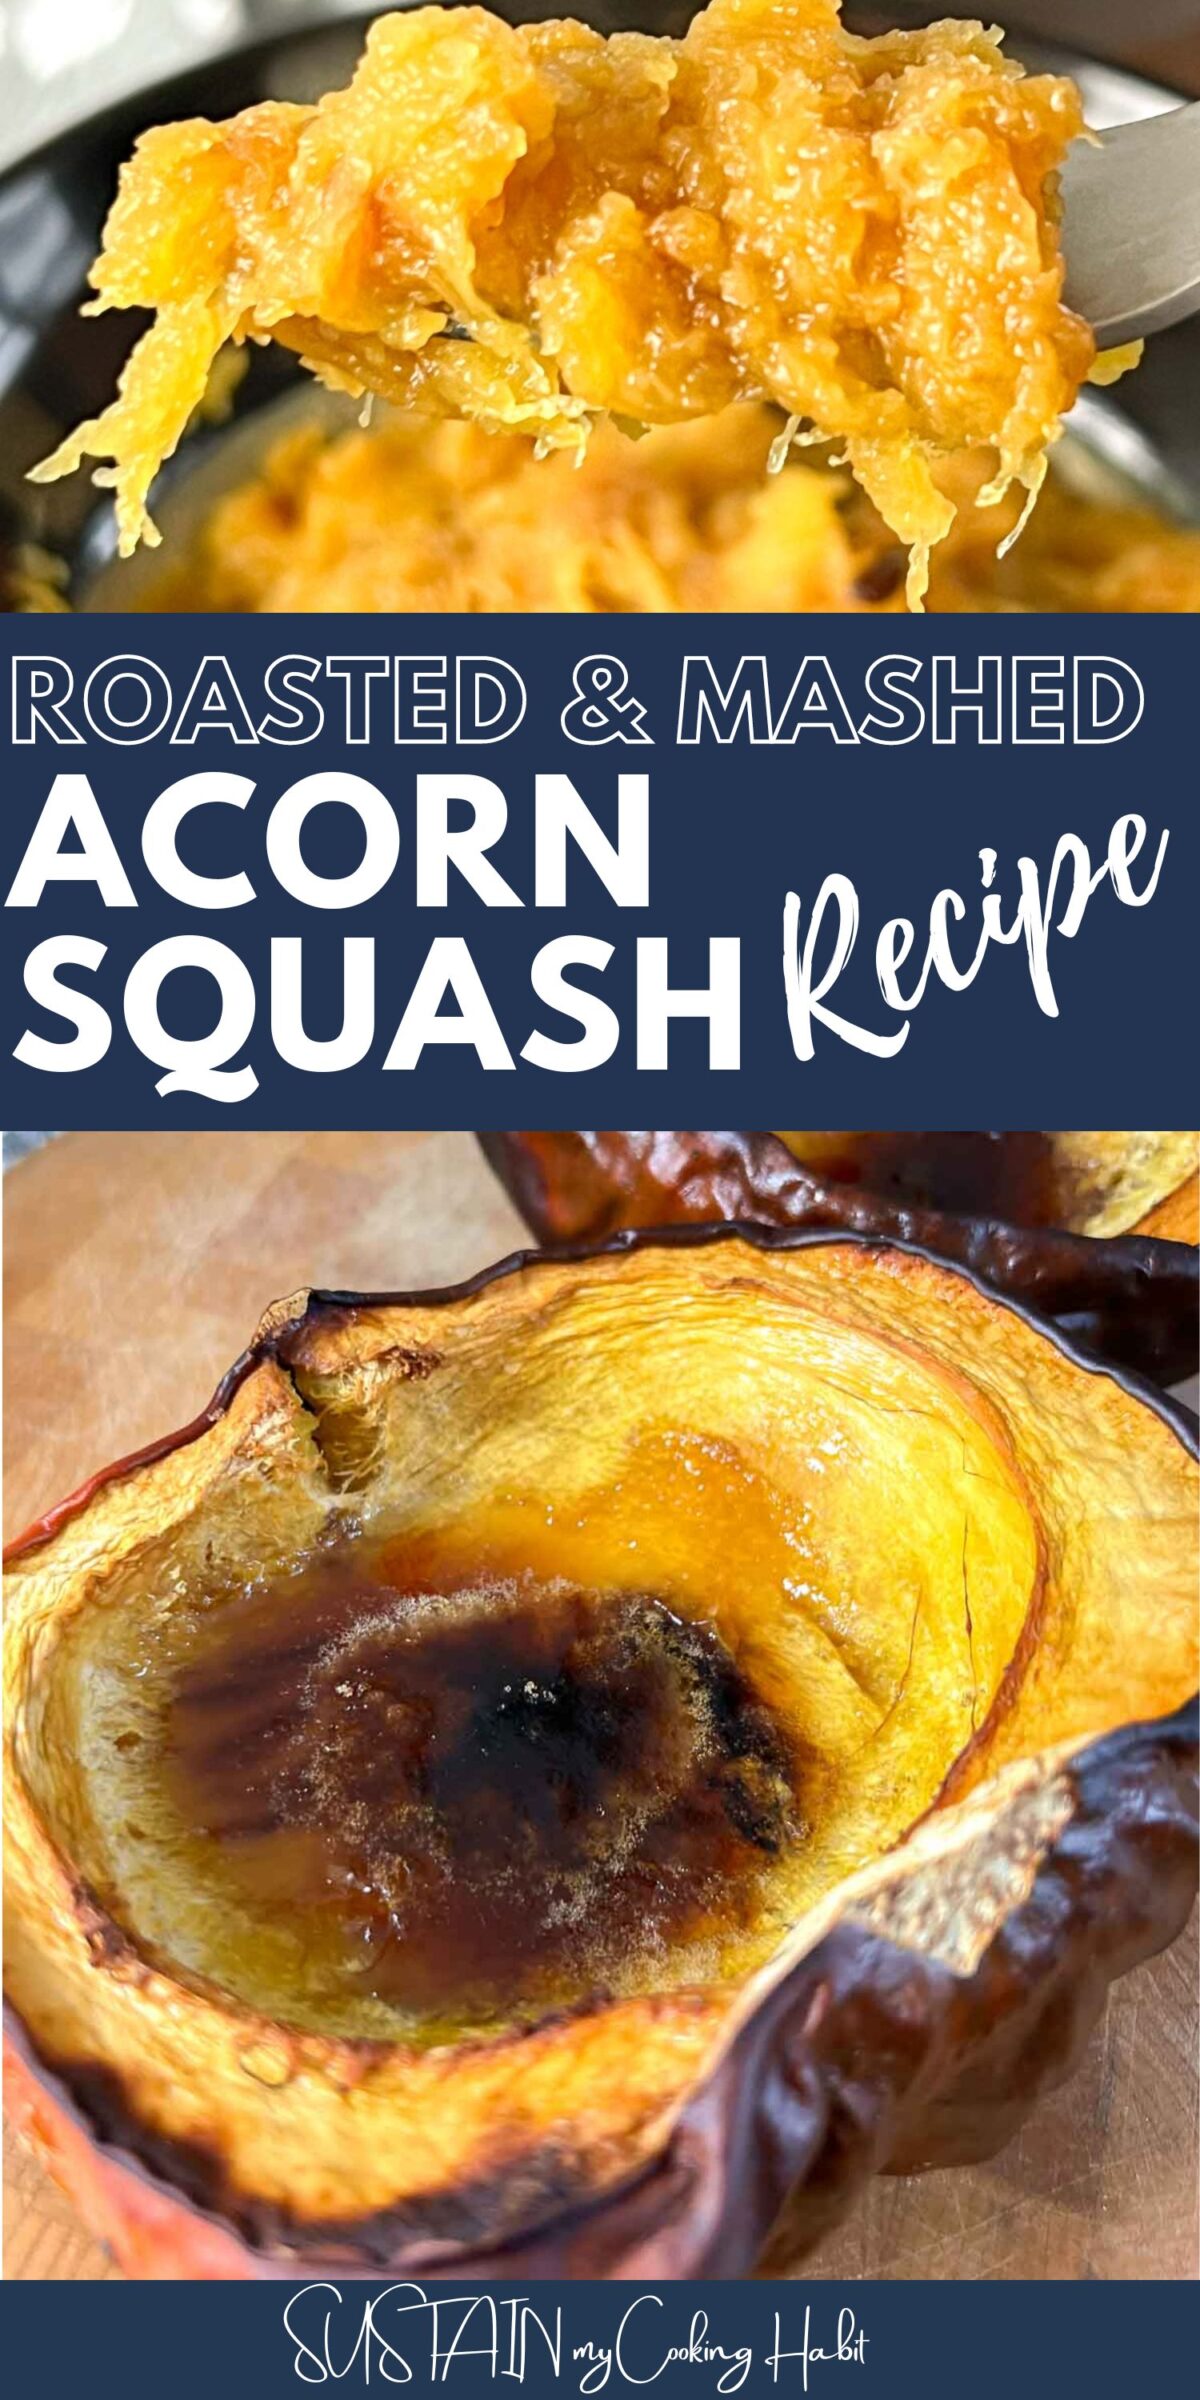 Collage with text overlay showing roasted acorn squash.